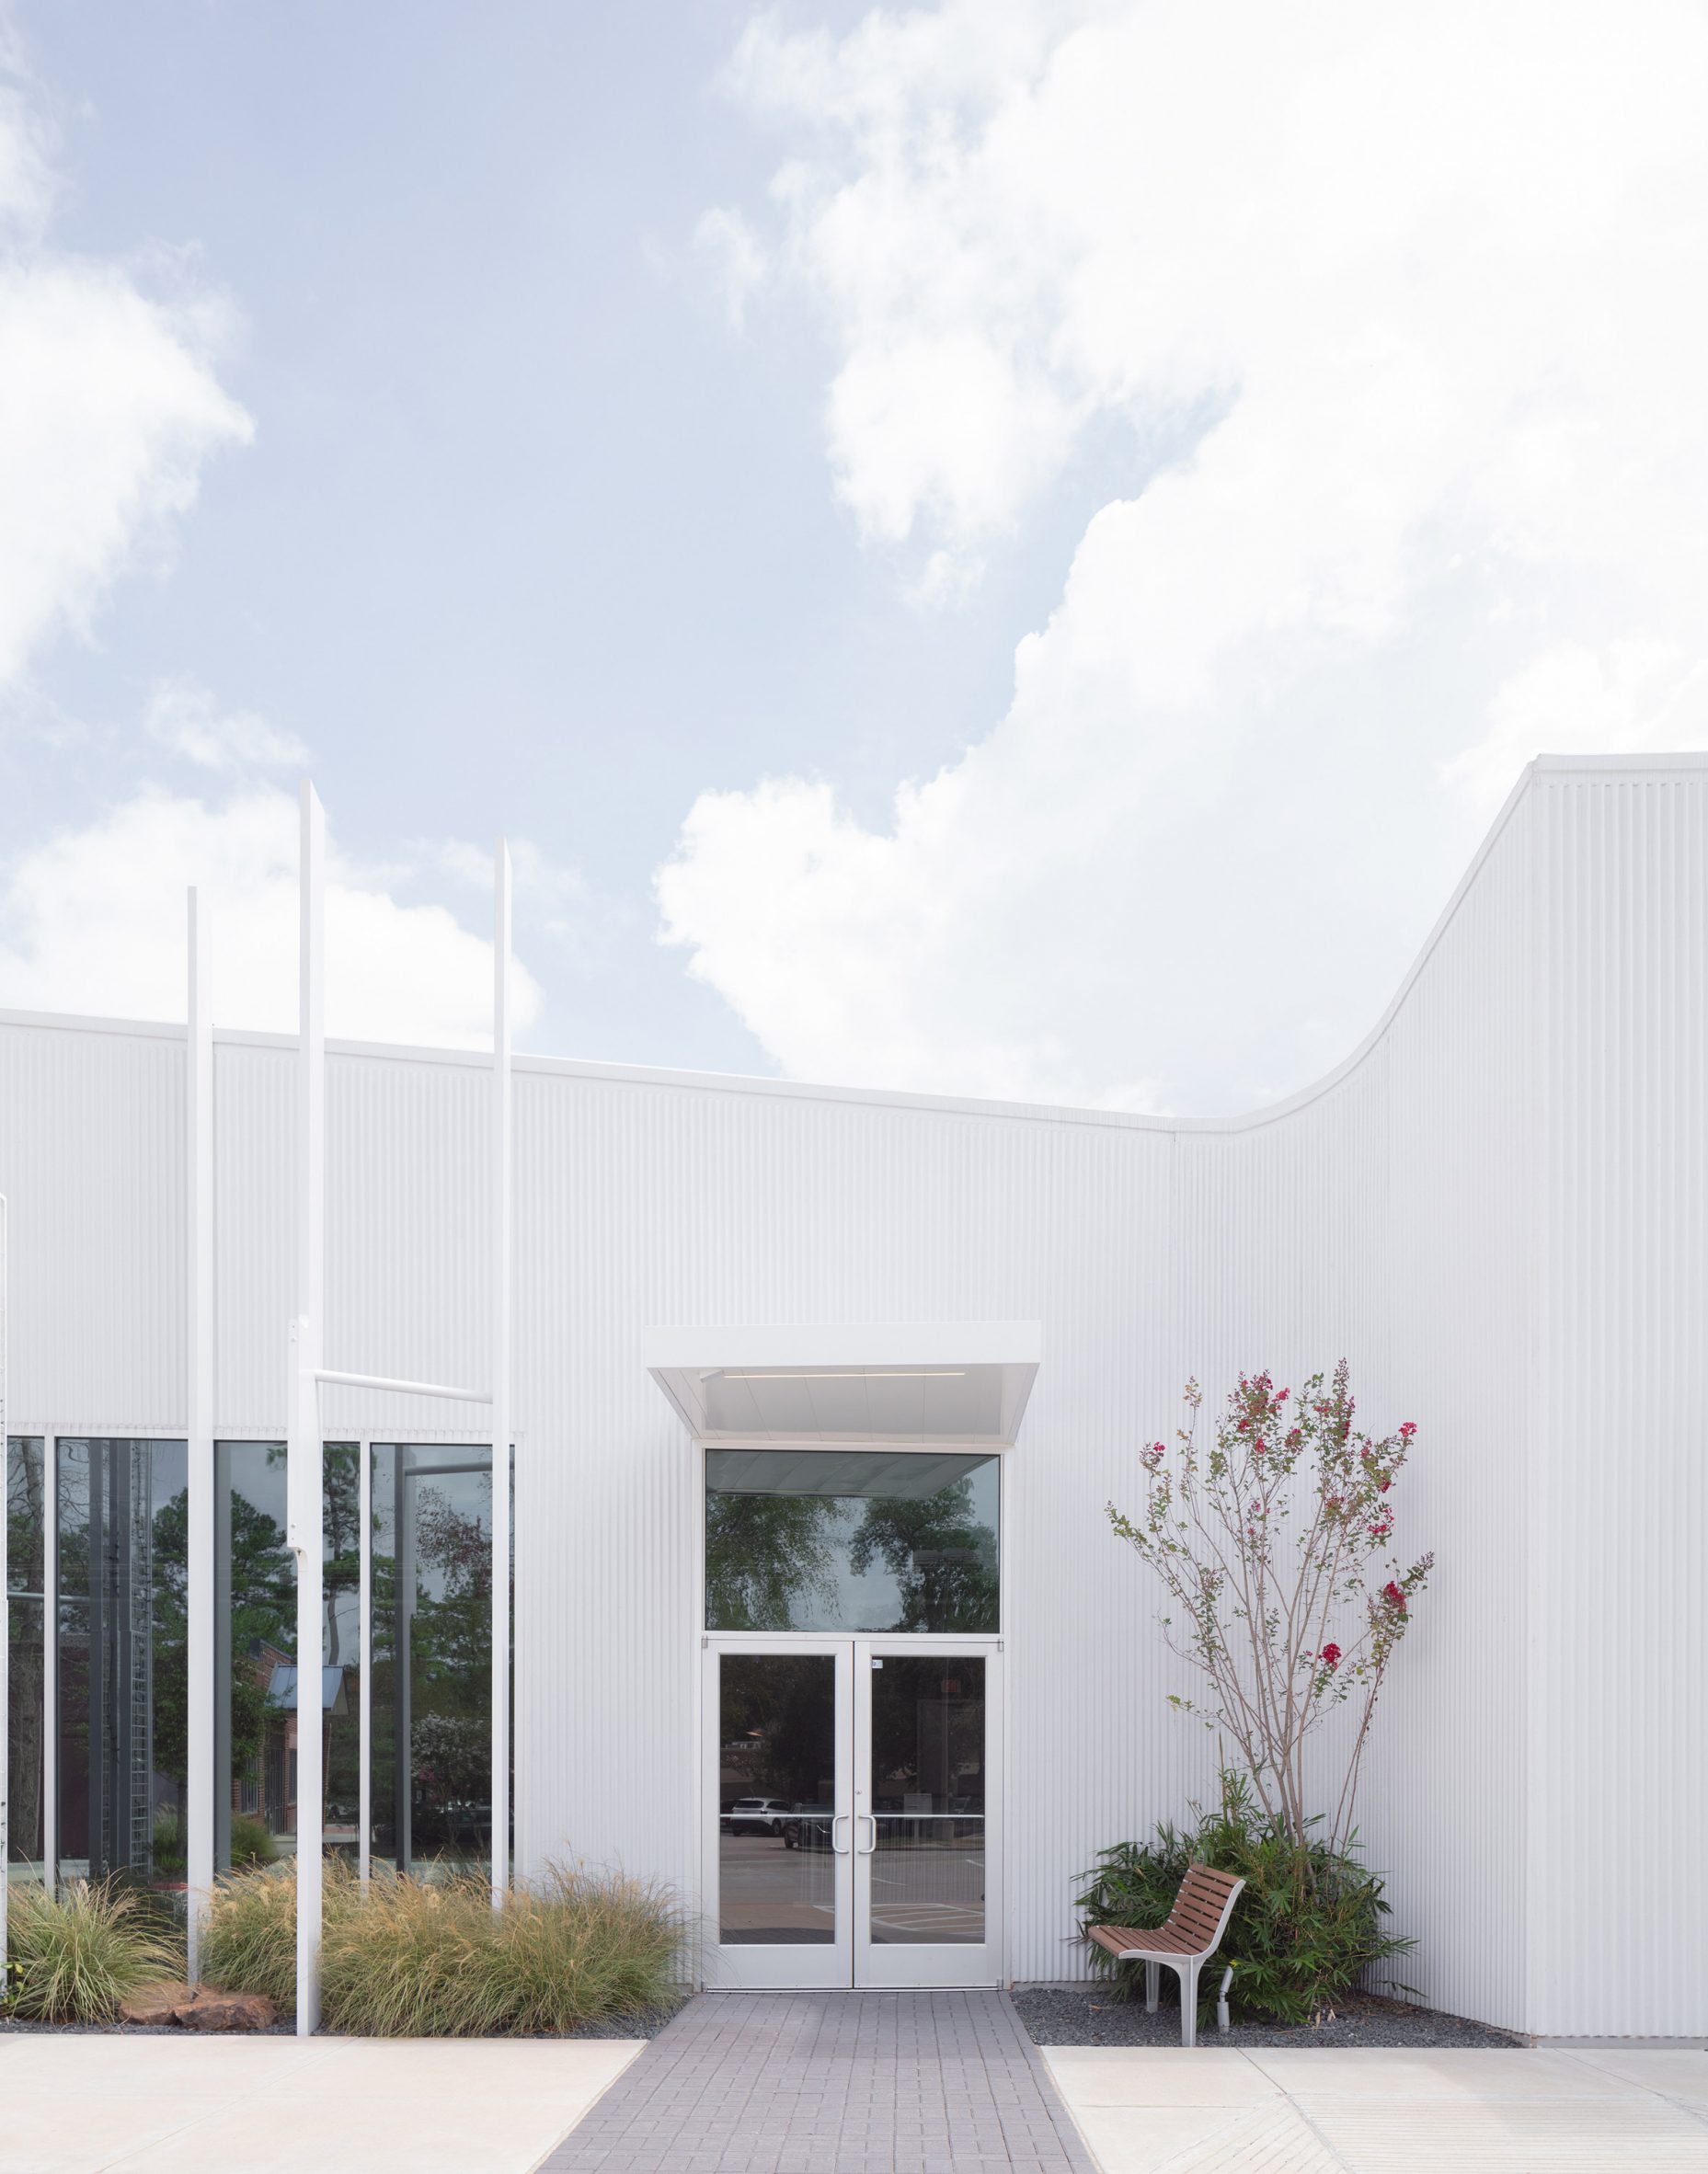 White building with pocket gardens